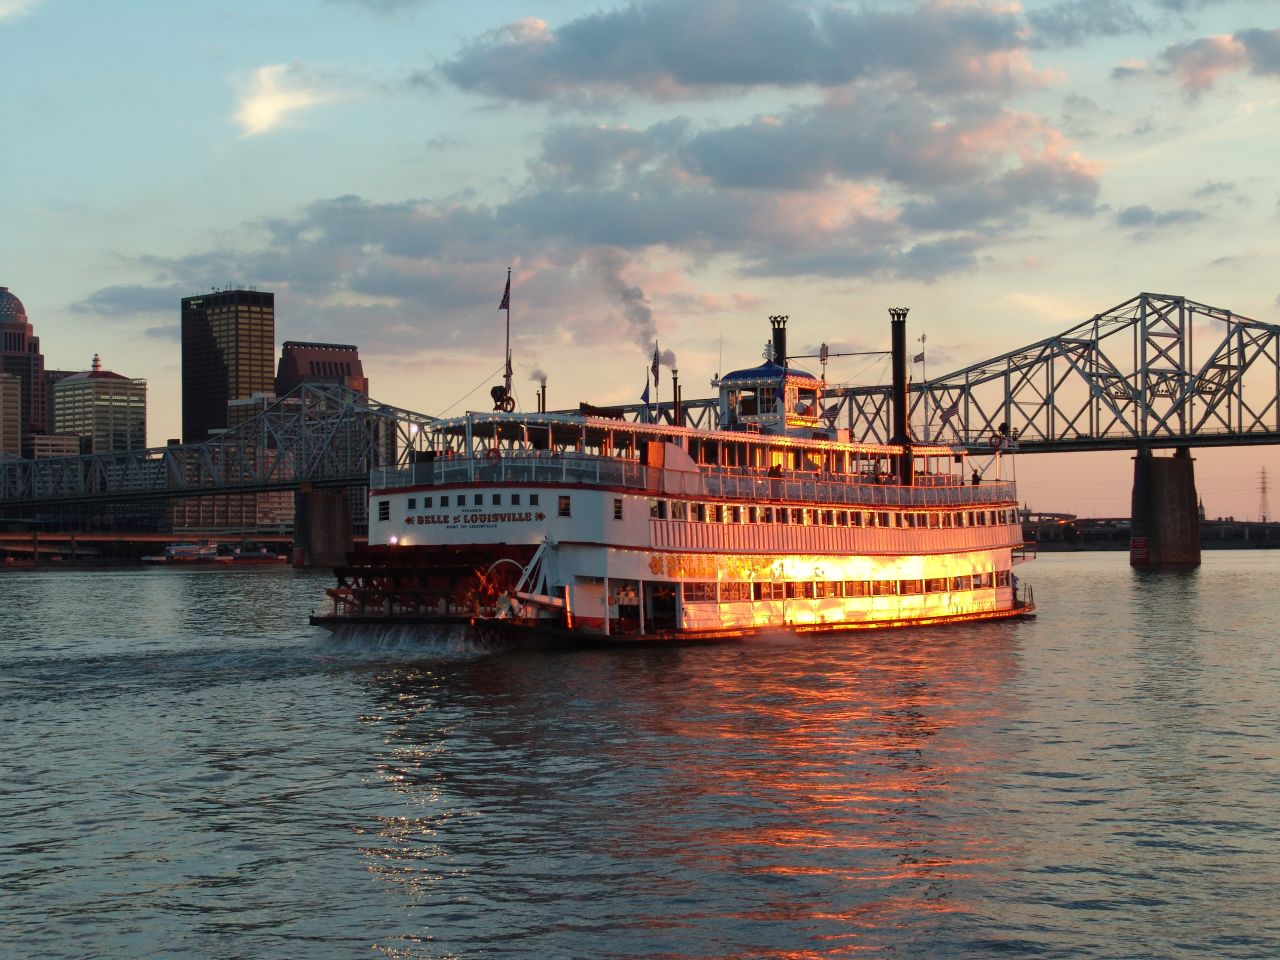 The Belle of Louisville, which turns 100 in 2014, is a river steamboat and a National Historic Landmark. Louisville tops Lonely Planet's list of U.S. destinations to visit in 2013.